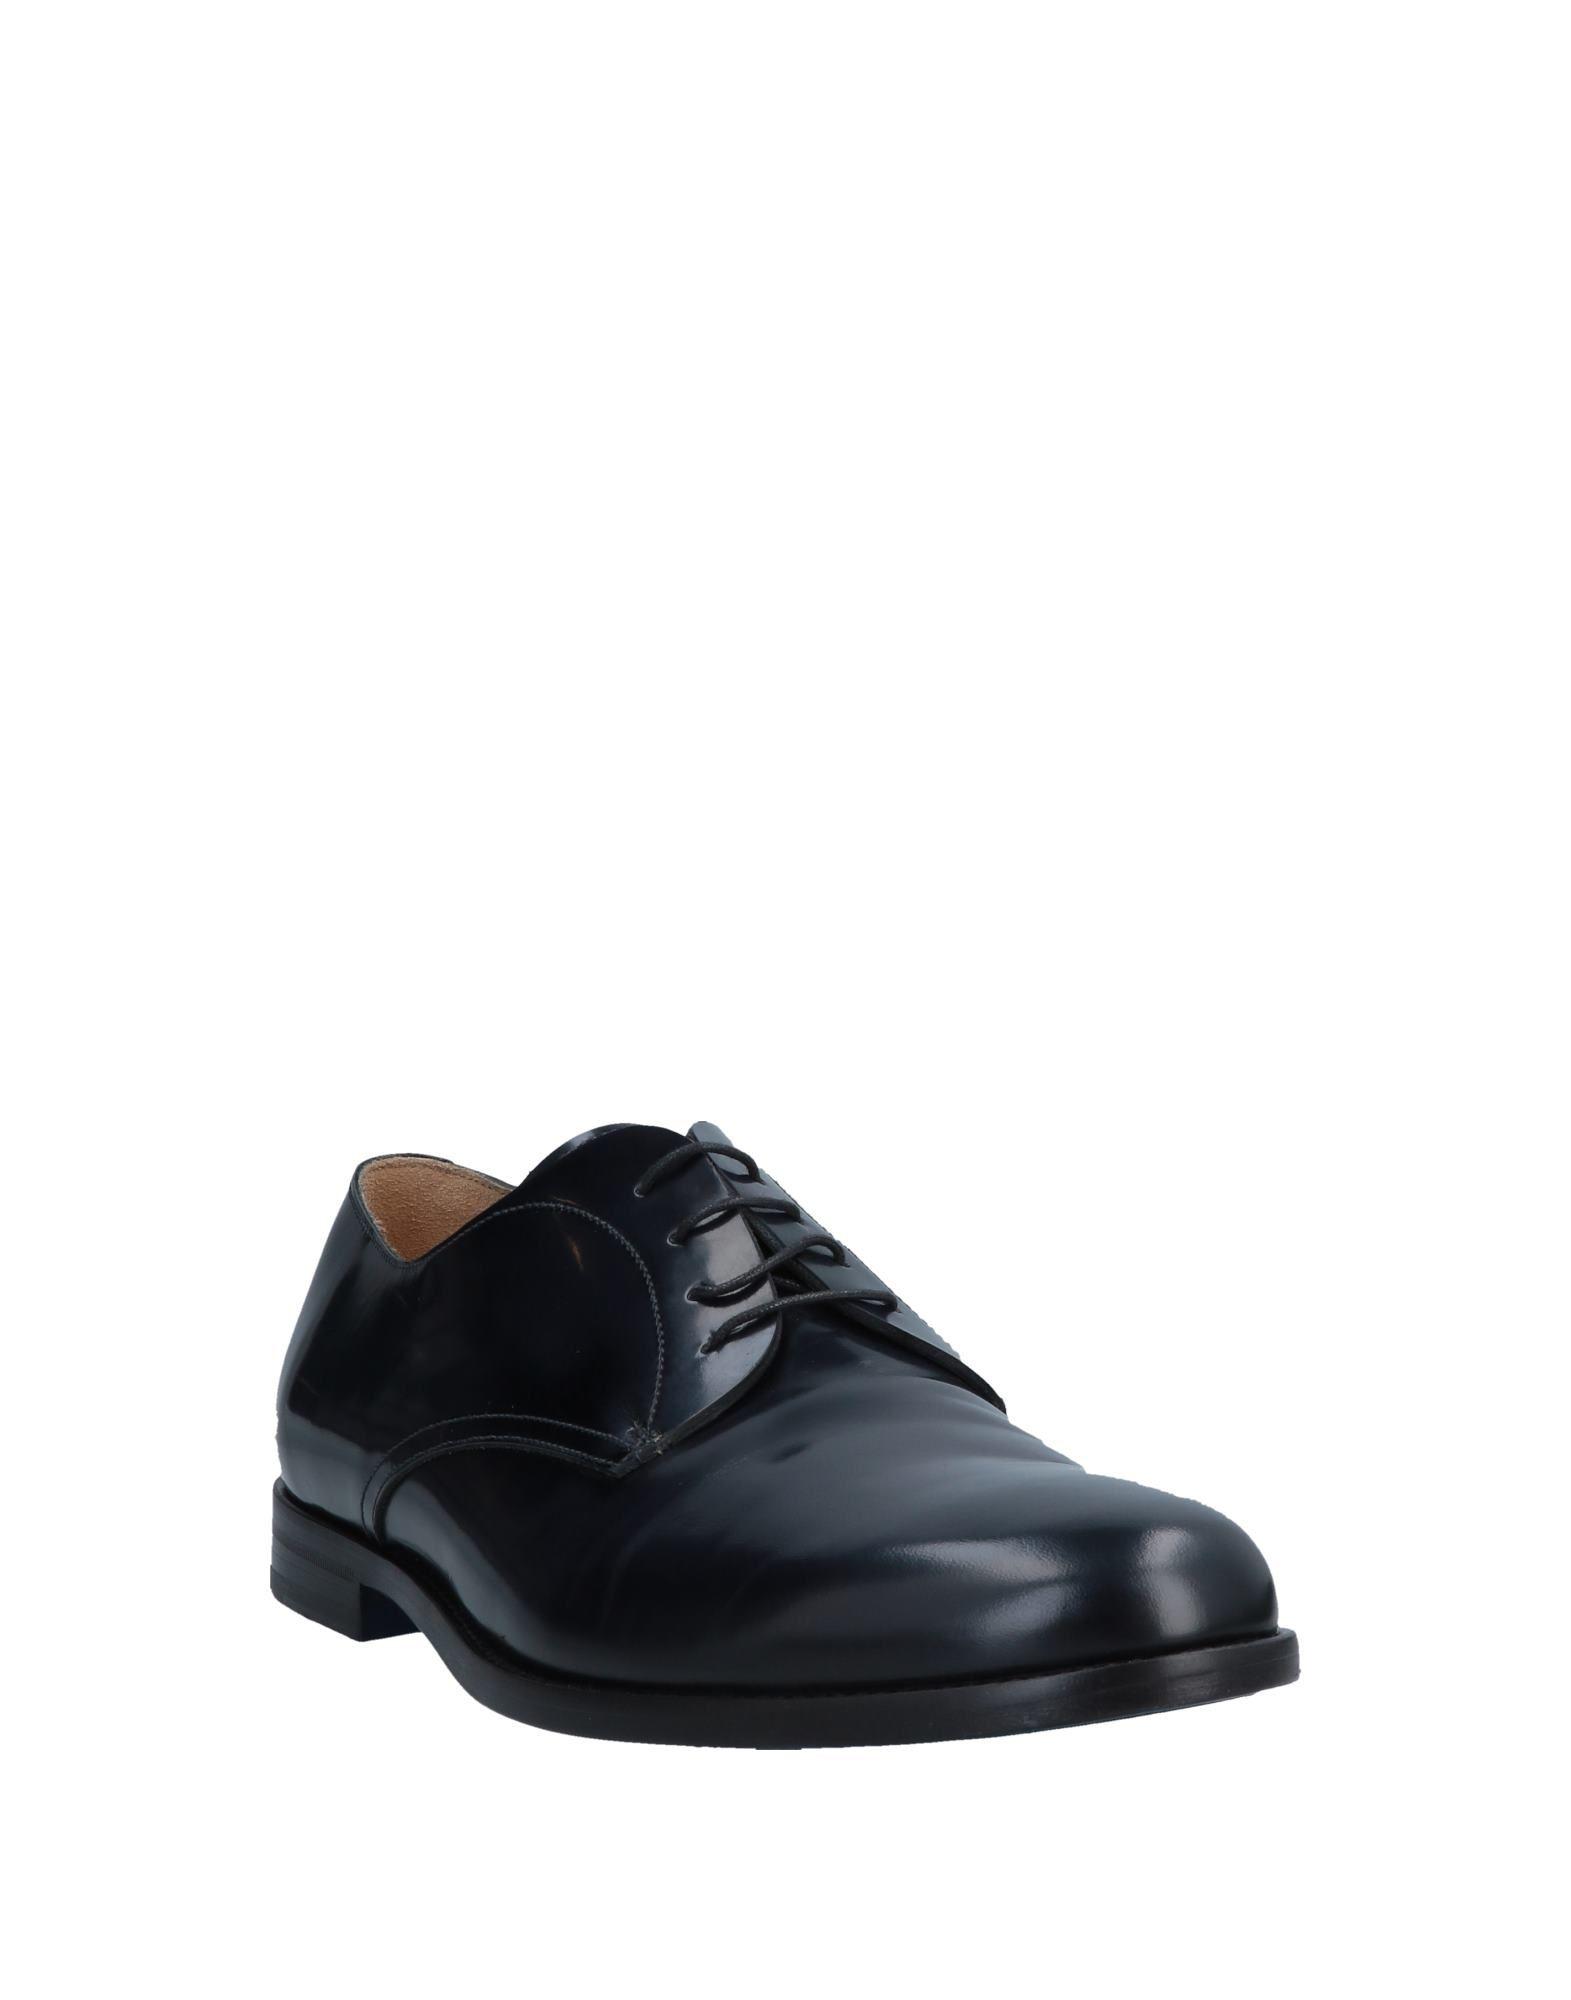 Sutor Mantellassi Lace-up Shoe in Blue for Men - Lyst